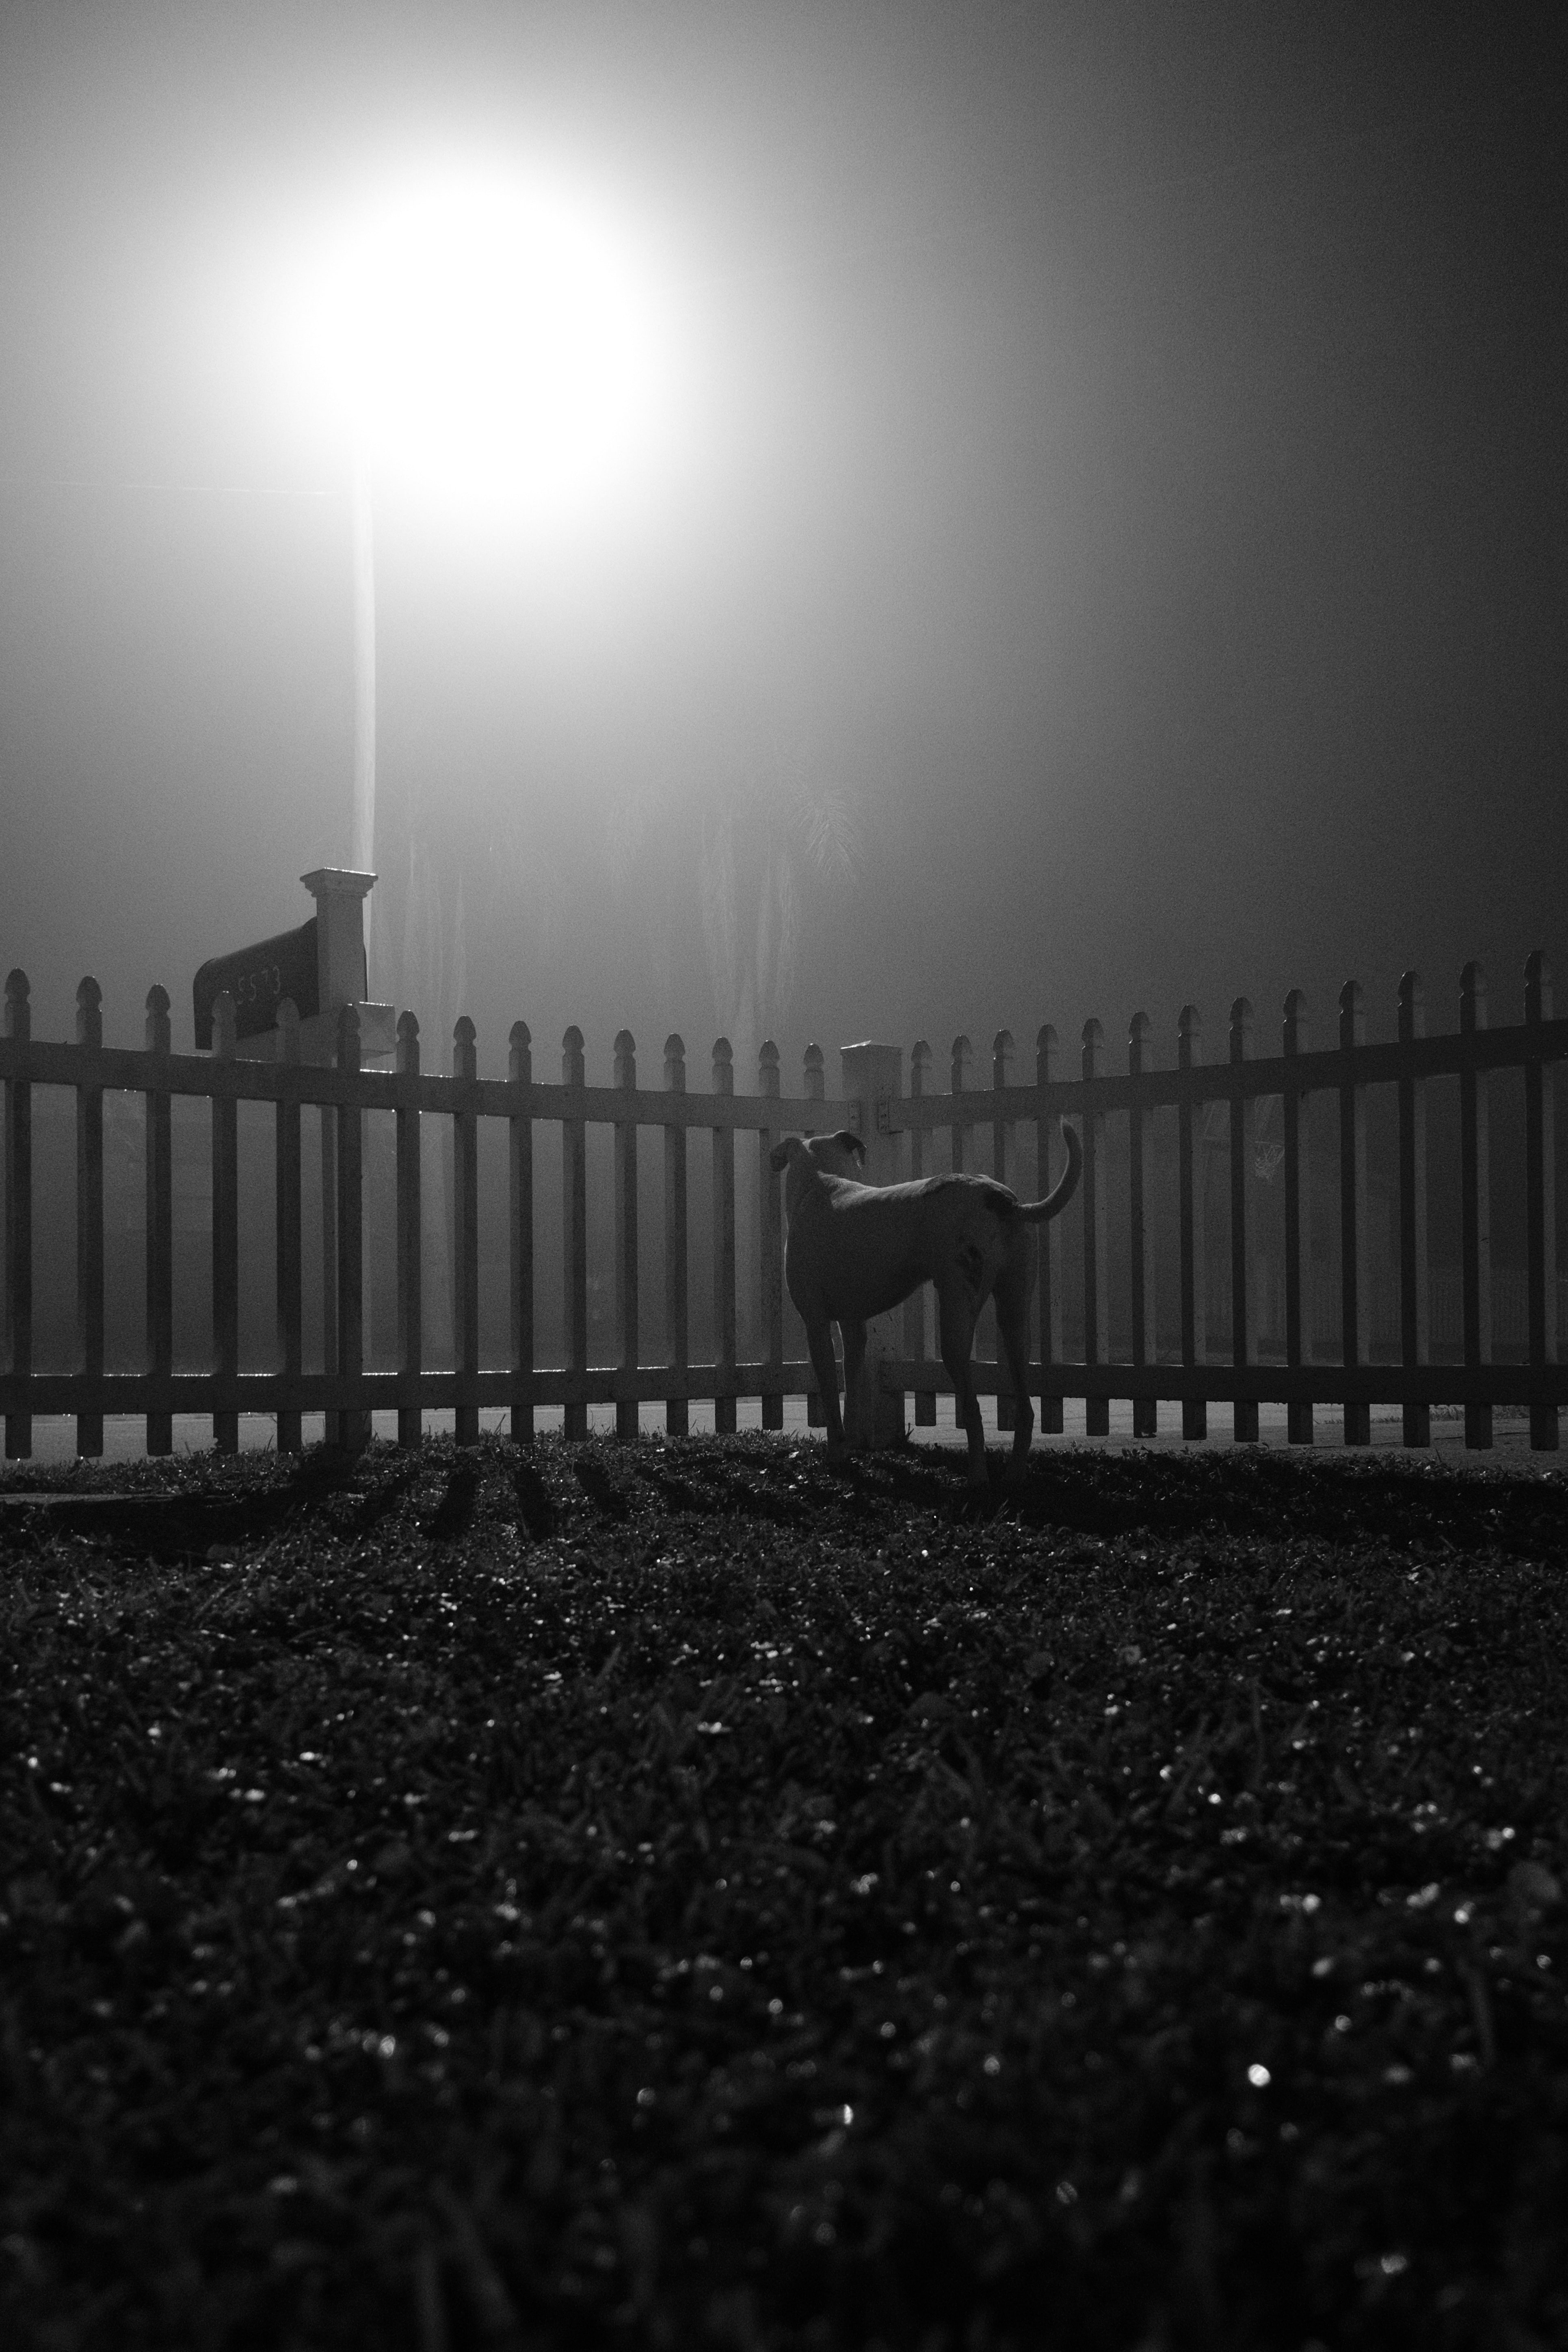 A dog in a yard encased by a white picket fence, stands guard in the ominous fox as the street is lit up the street lamp. Monochrome.